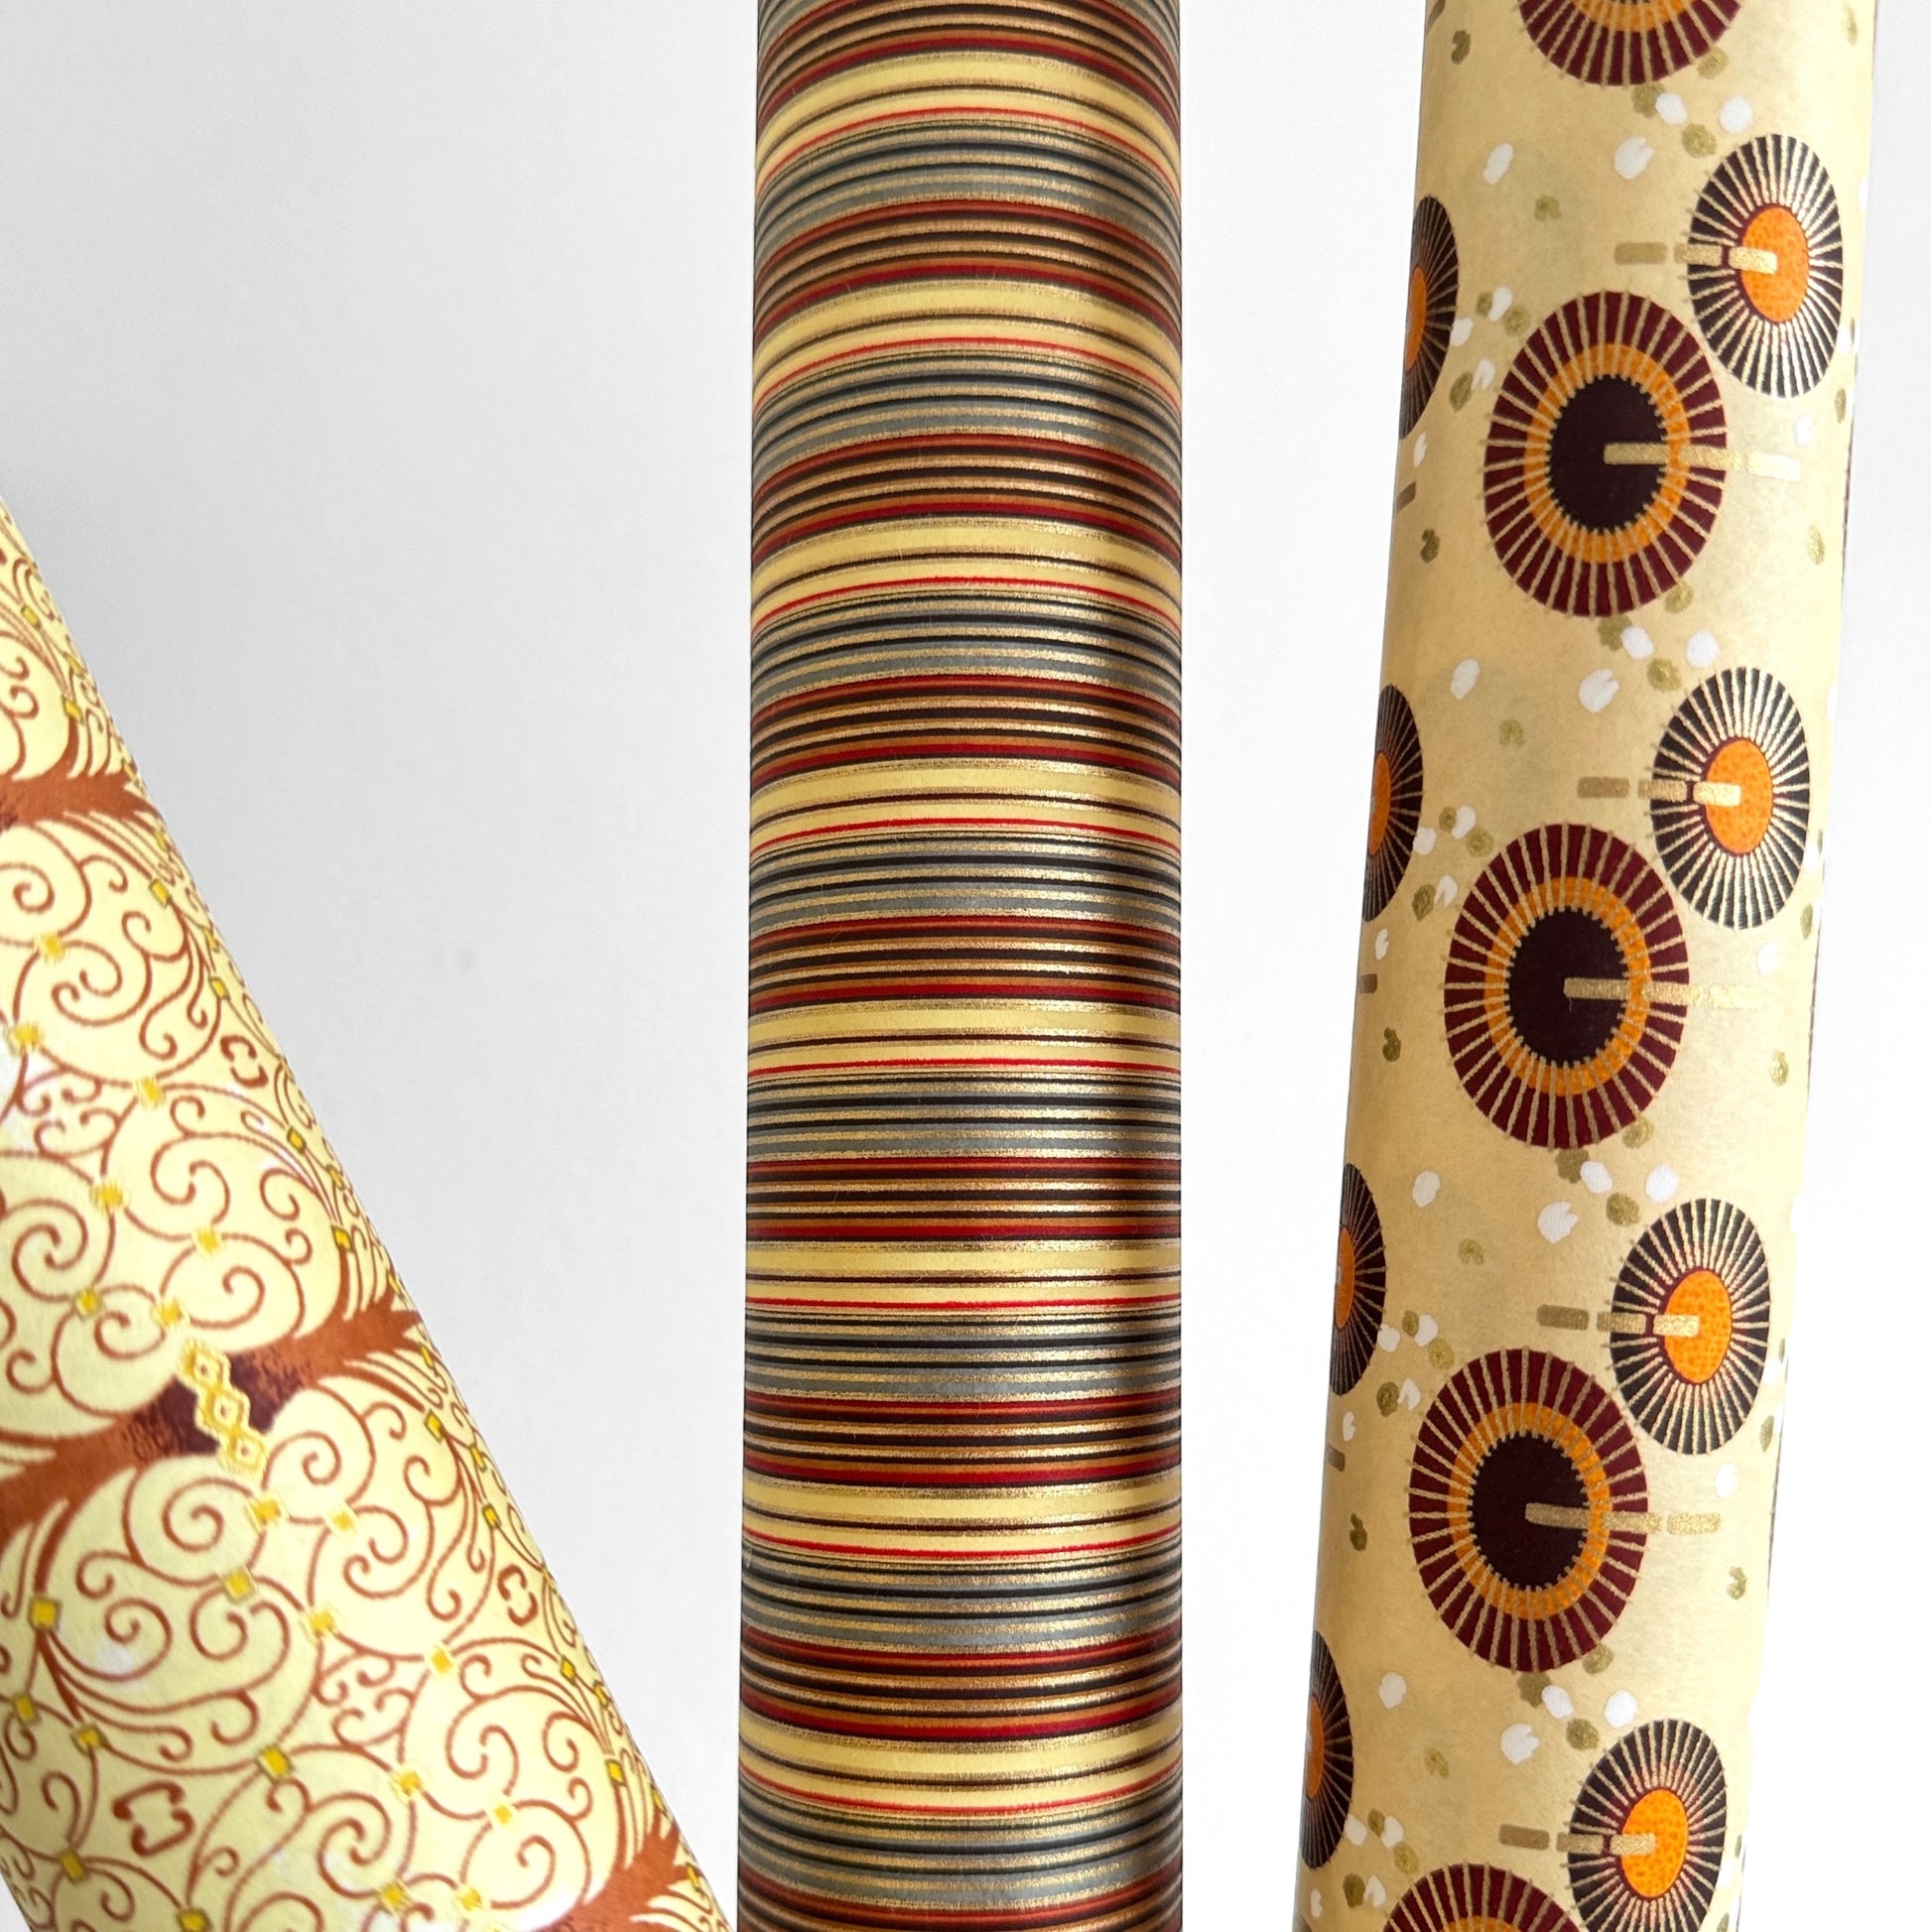 Japanese silkscreen chiyogami paper with a classic narrow stripe pattern in earthy tones of brown, grey, cream, black and gold. Pictured rolled with other designs.